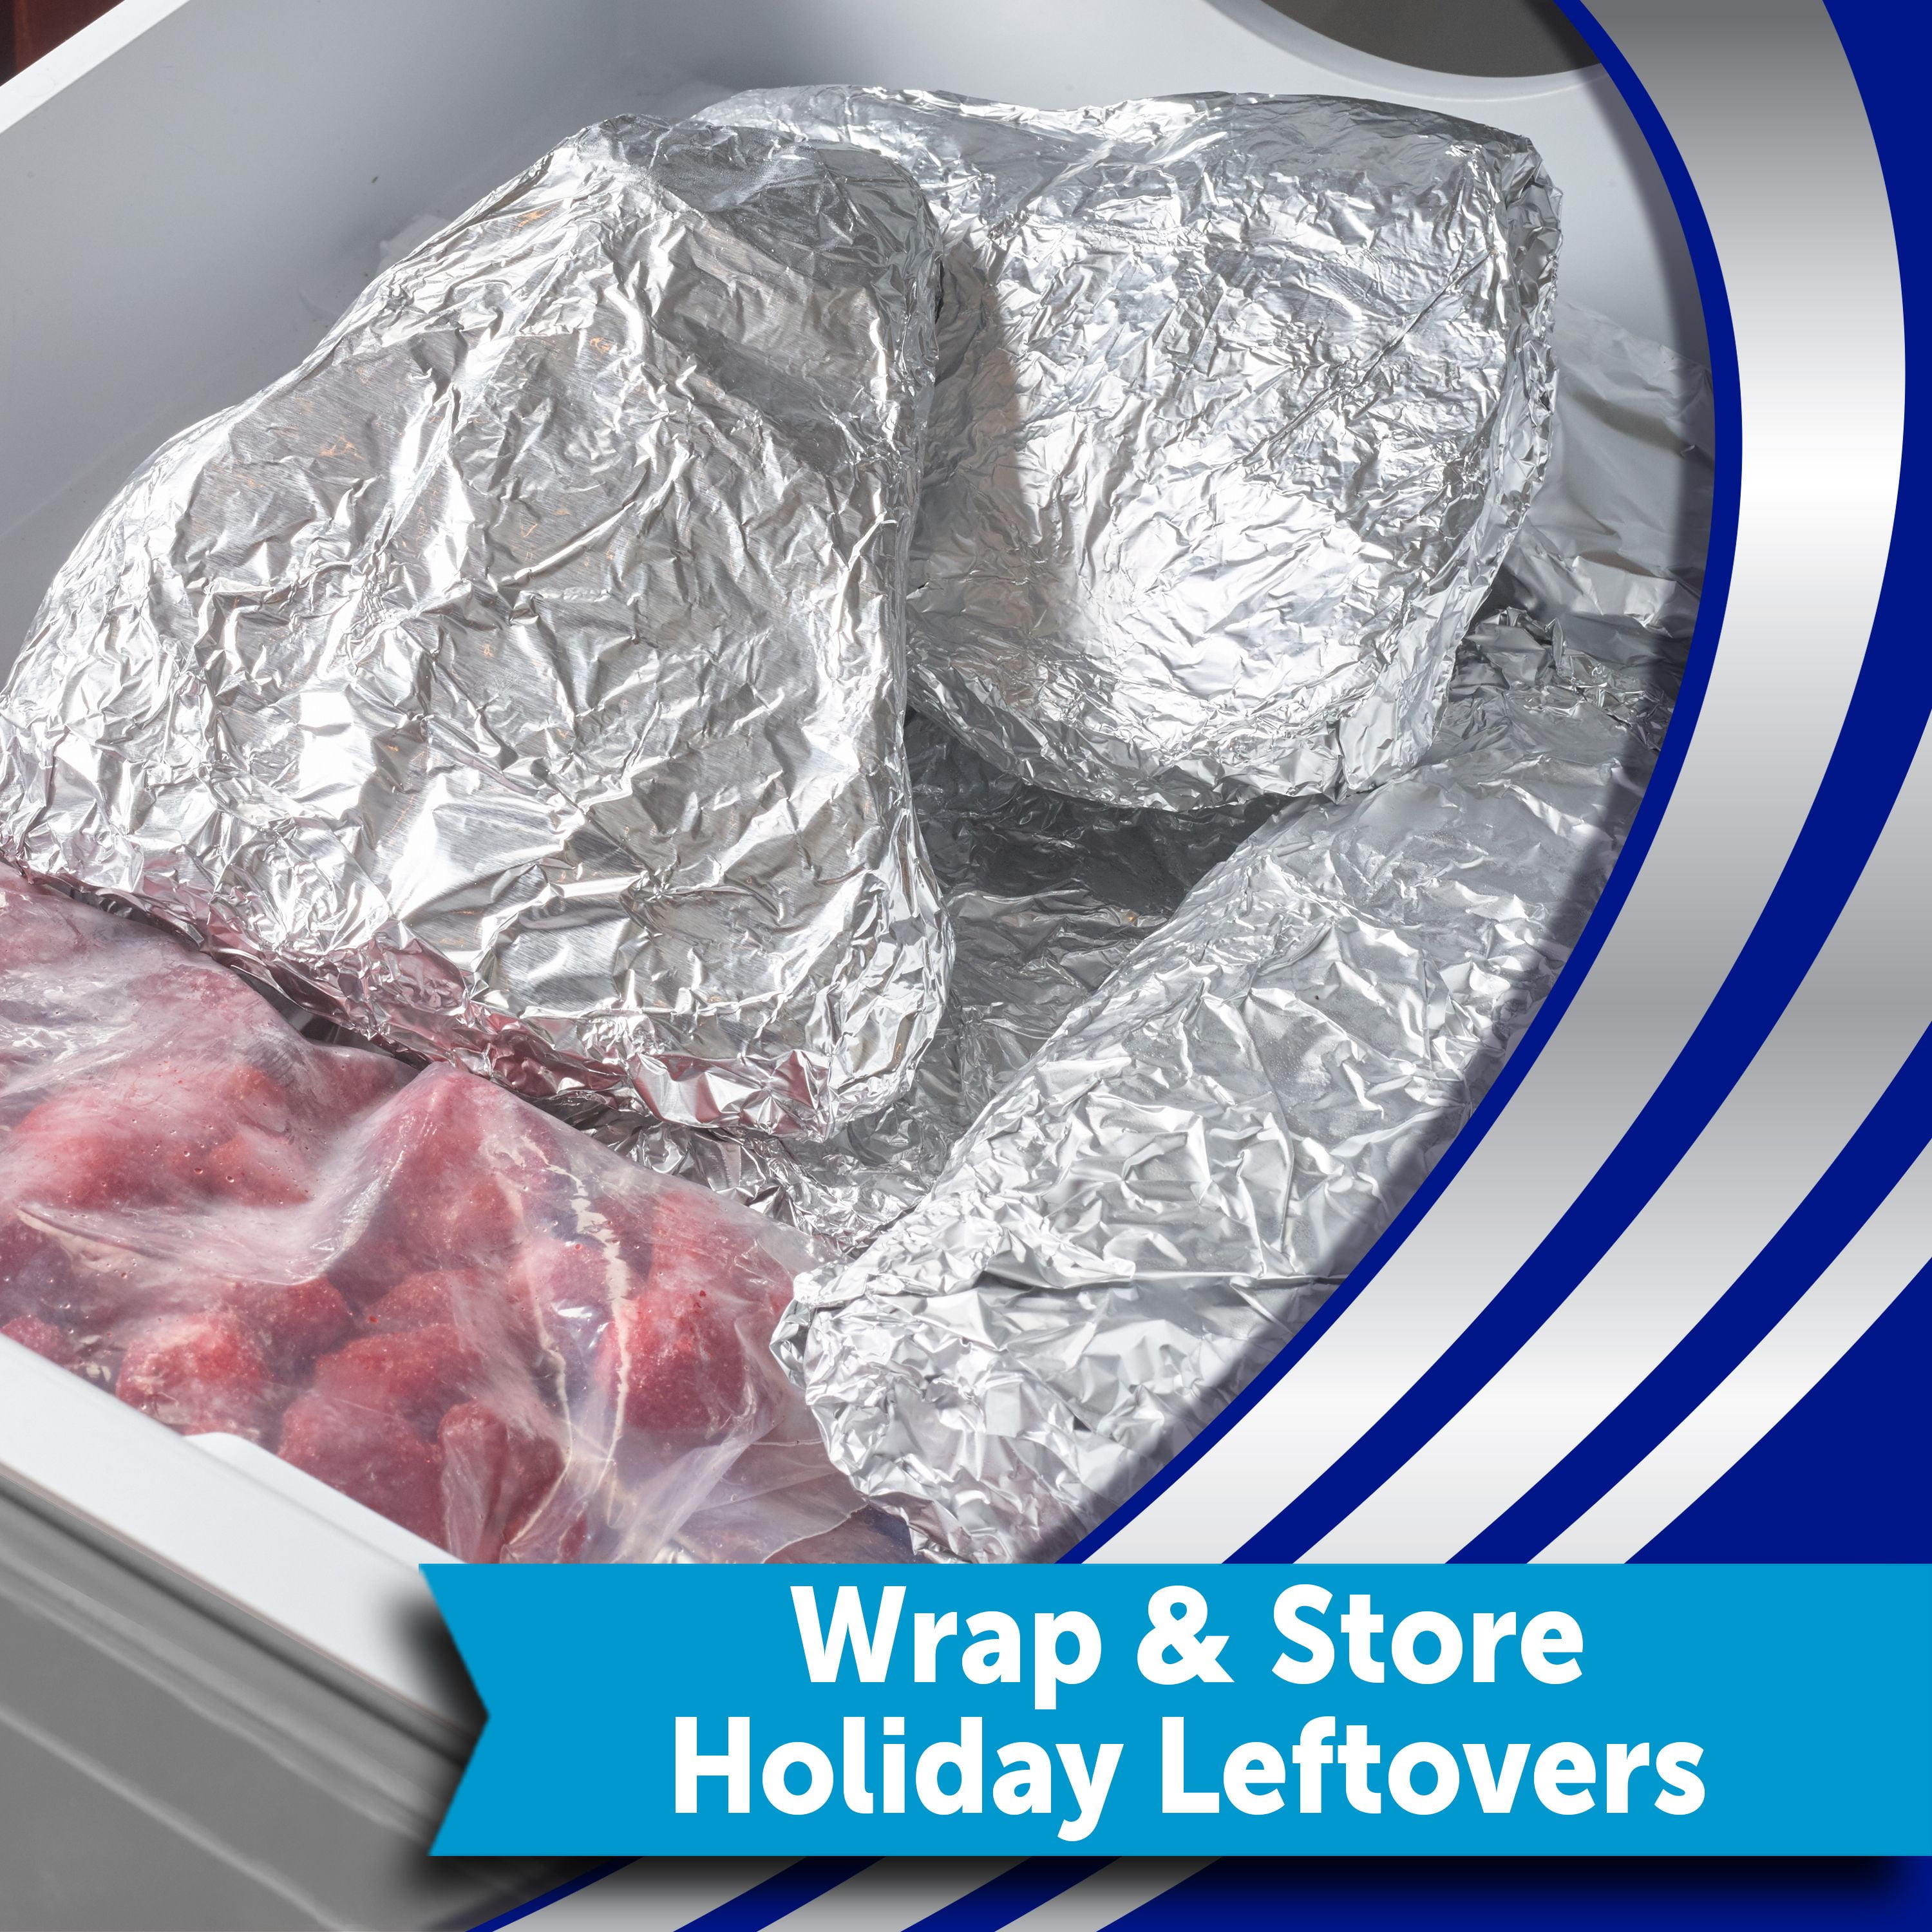 Reynolds Wrap 12 Aluminum Foil {250 sq. ft., 2 ct.} - [The brand you can  trust]